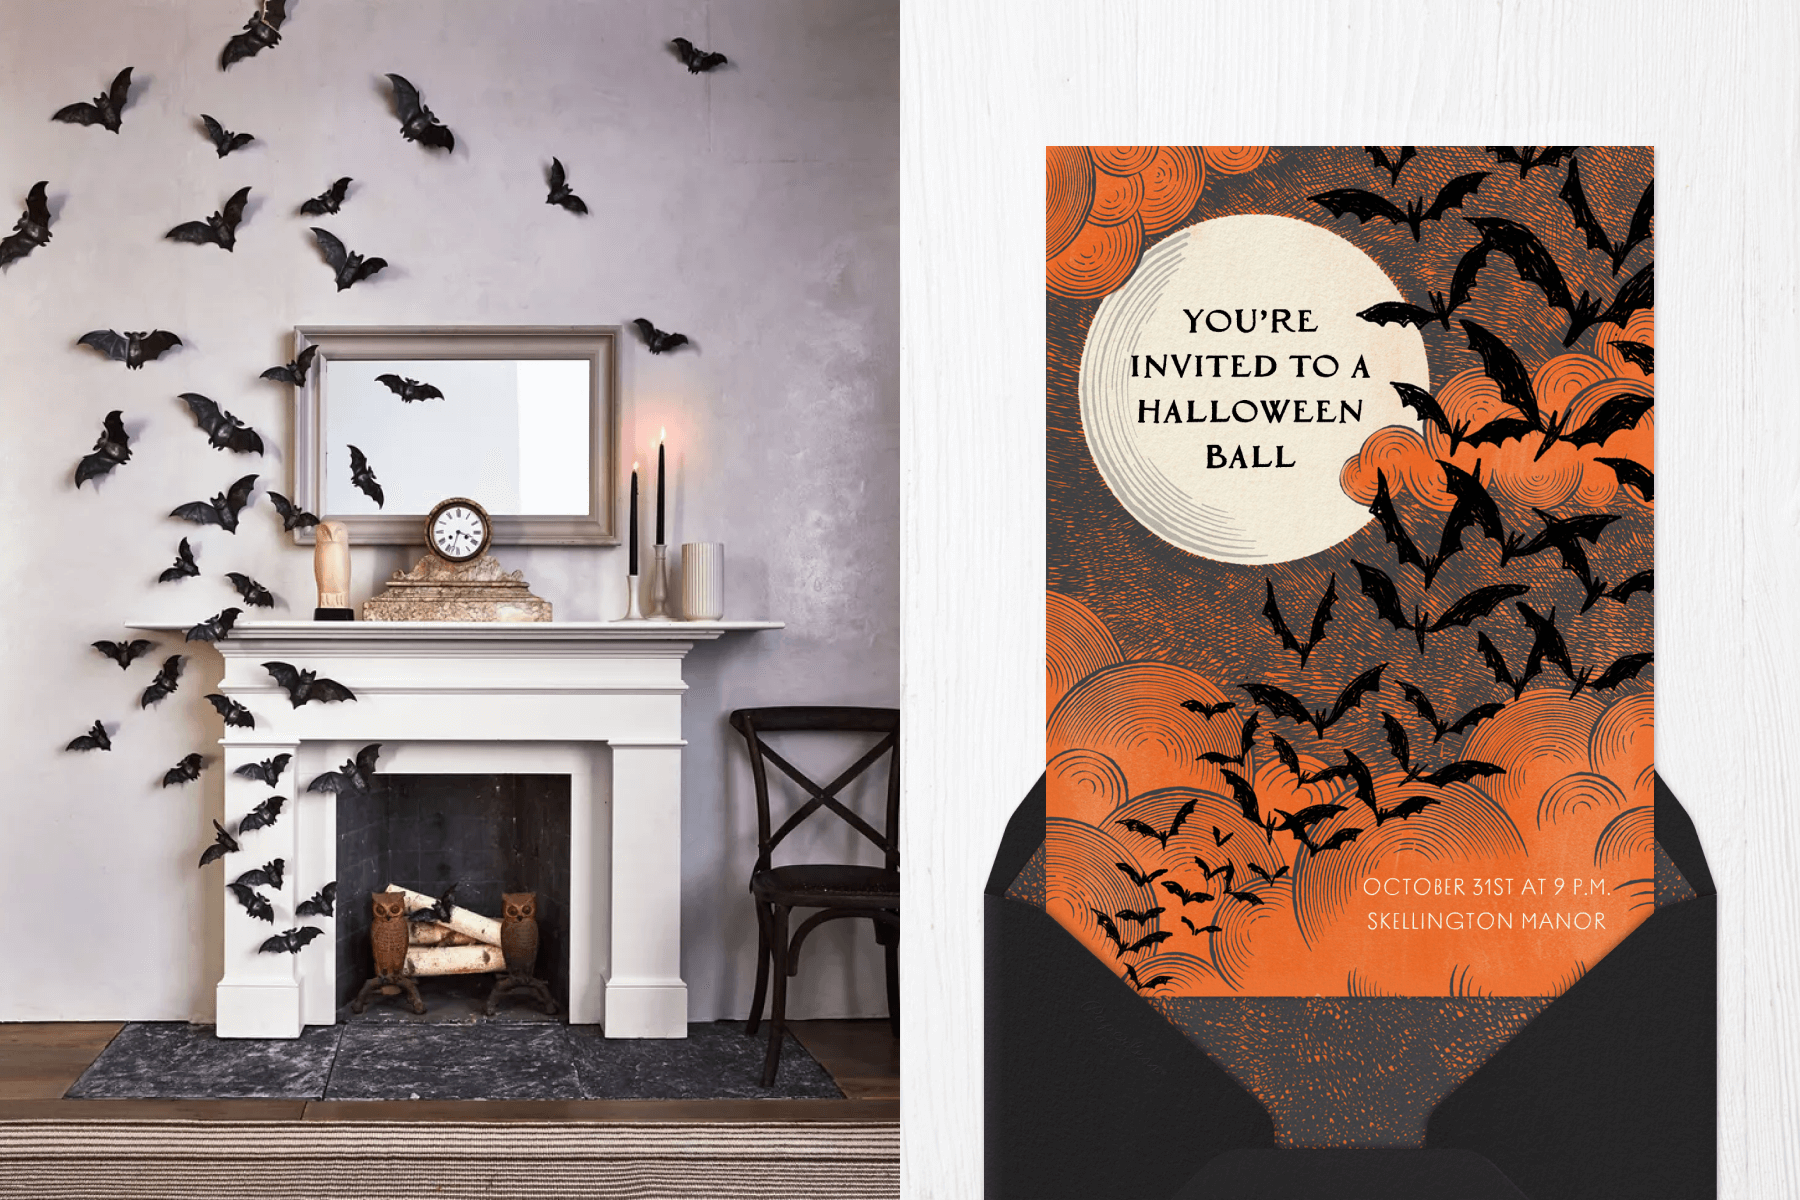 Left: A fireplace with a white mantel and mirror and clock over it appears to have a colony of bats flying from the fireplace. Right: An orange Halloween ball invitation shows a colony of bats flying up across ominous clouds and a full moon from the bottom left to top right.